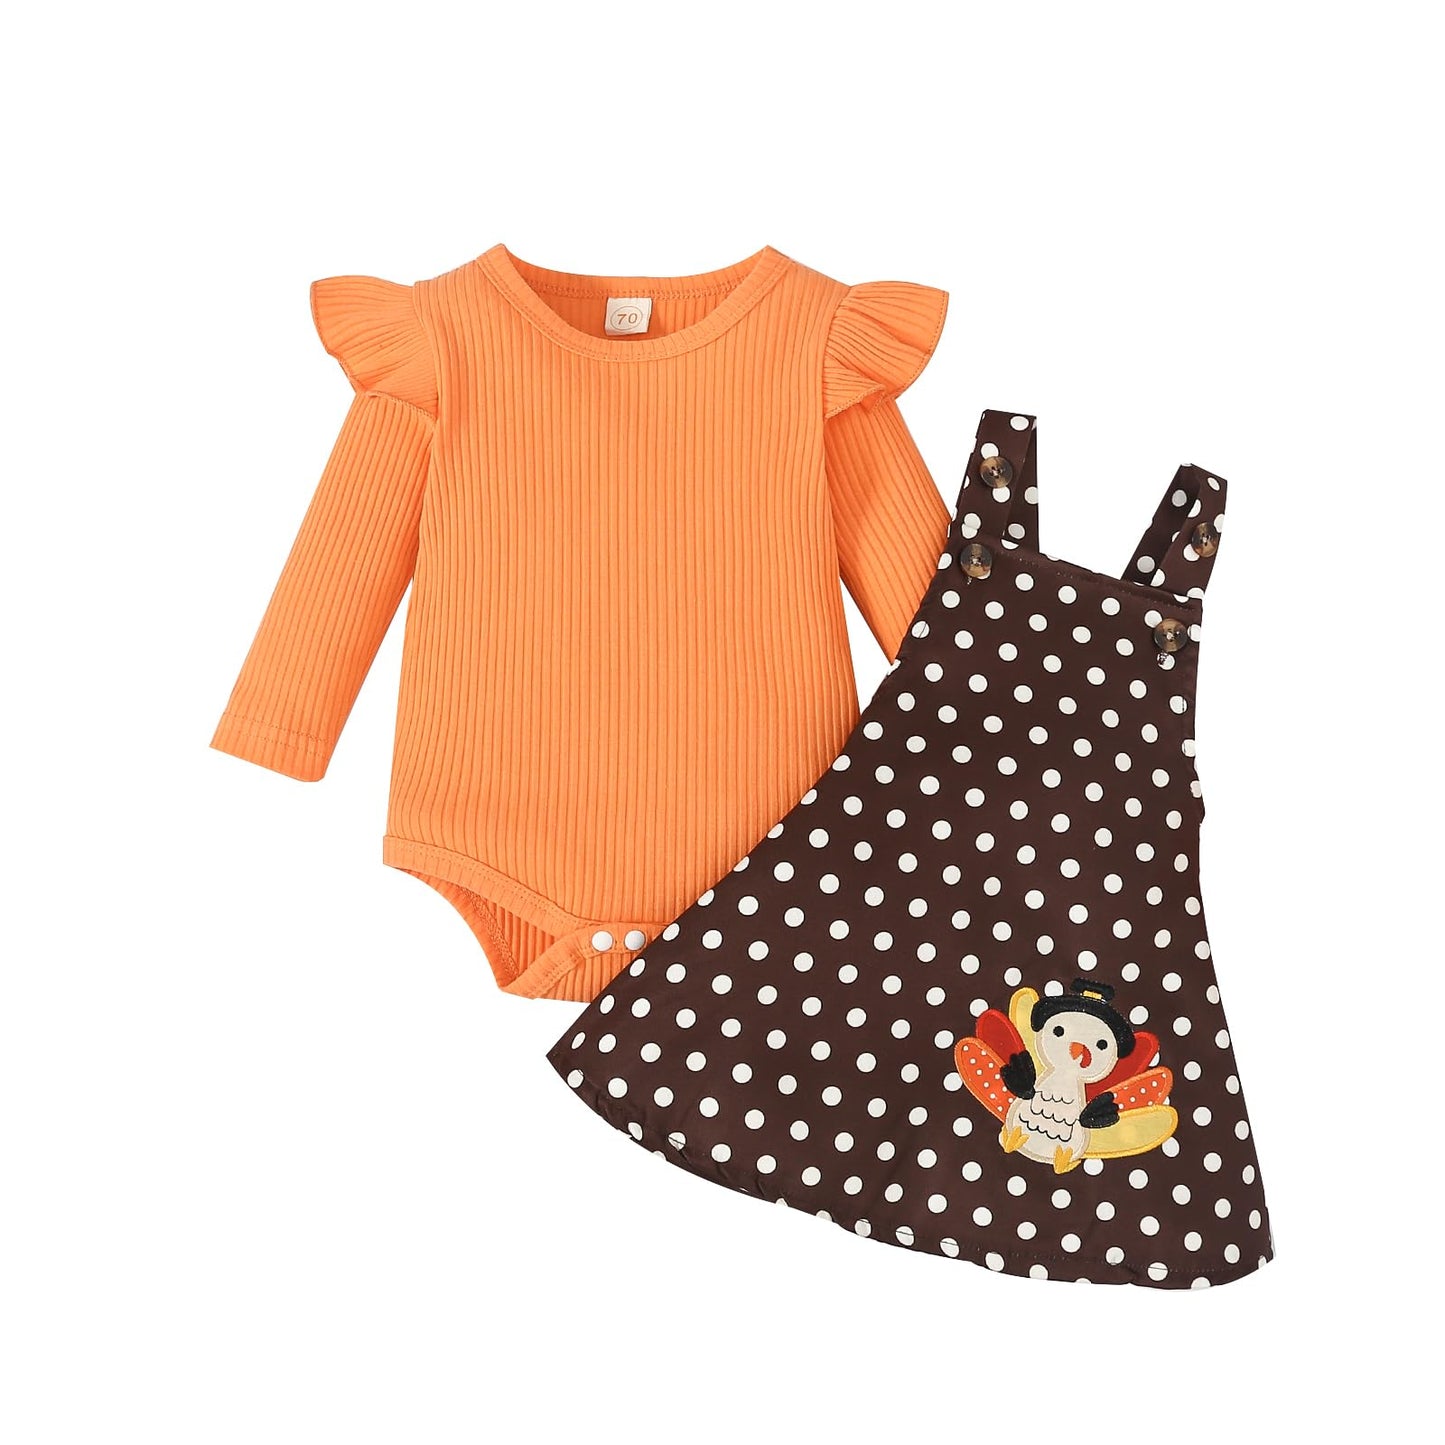 Toddler Baby Girl Thanksgiving Outfits Long Sleeve Ruffle Ribbed Top+Turkey Dot Suspender Dress Fall Winter Clothes, for 0-3 Months